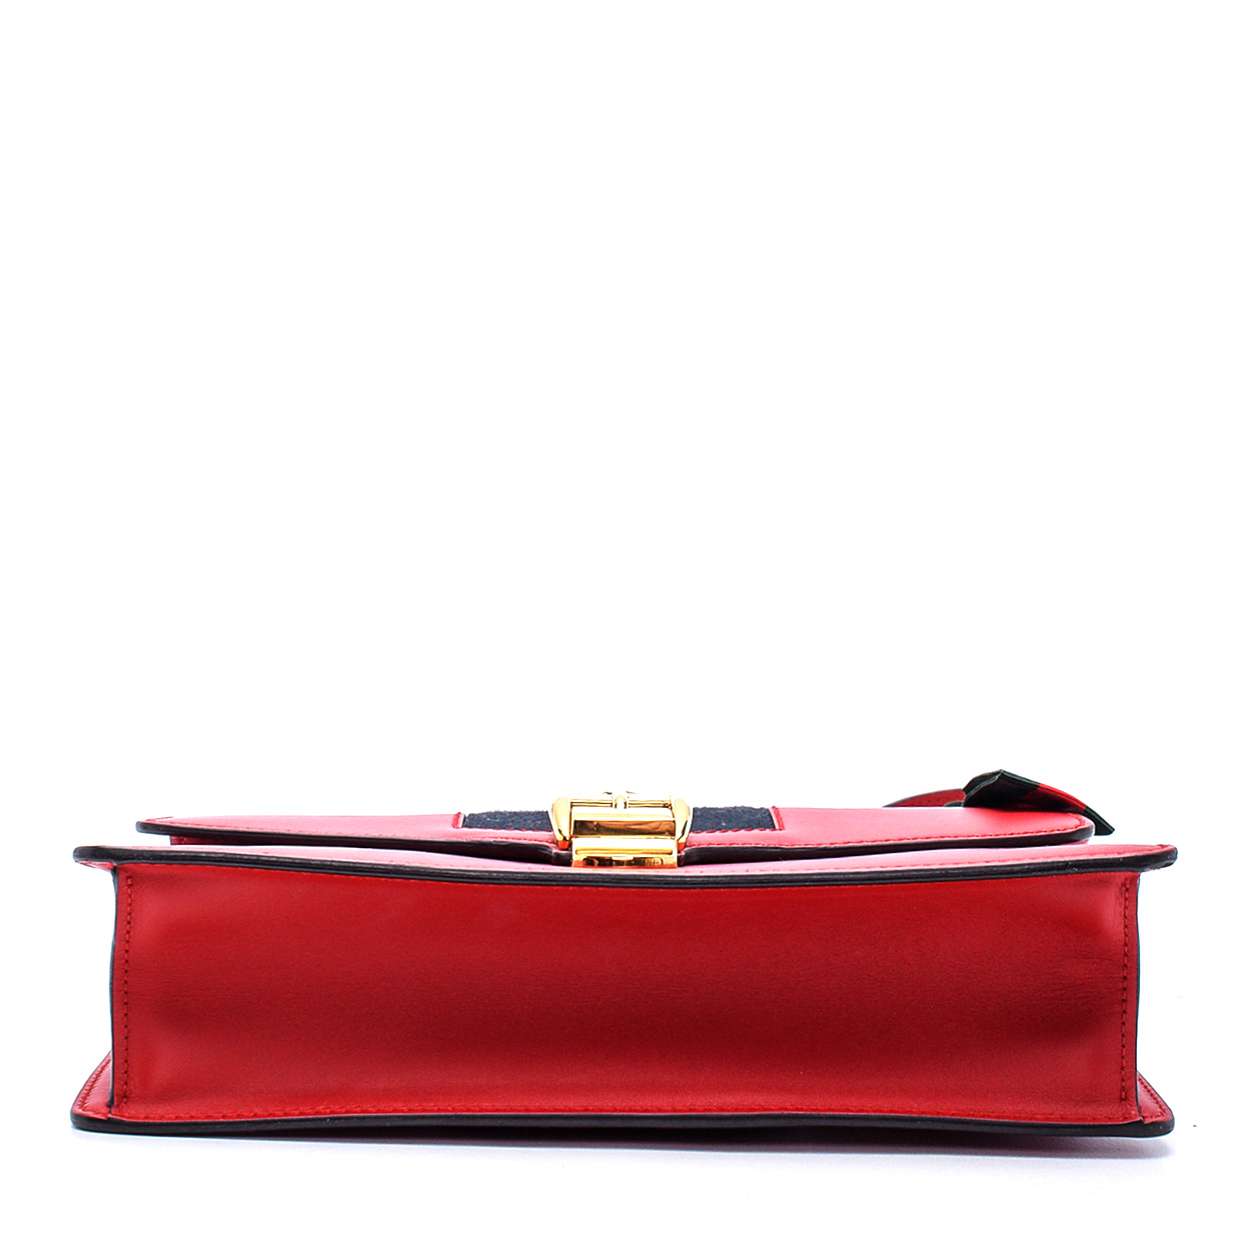 Gucci - Red Sylvie Leather Small Crossbody Bag